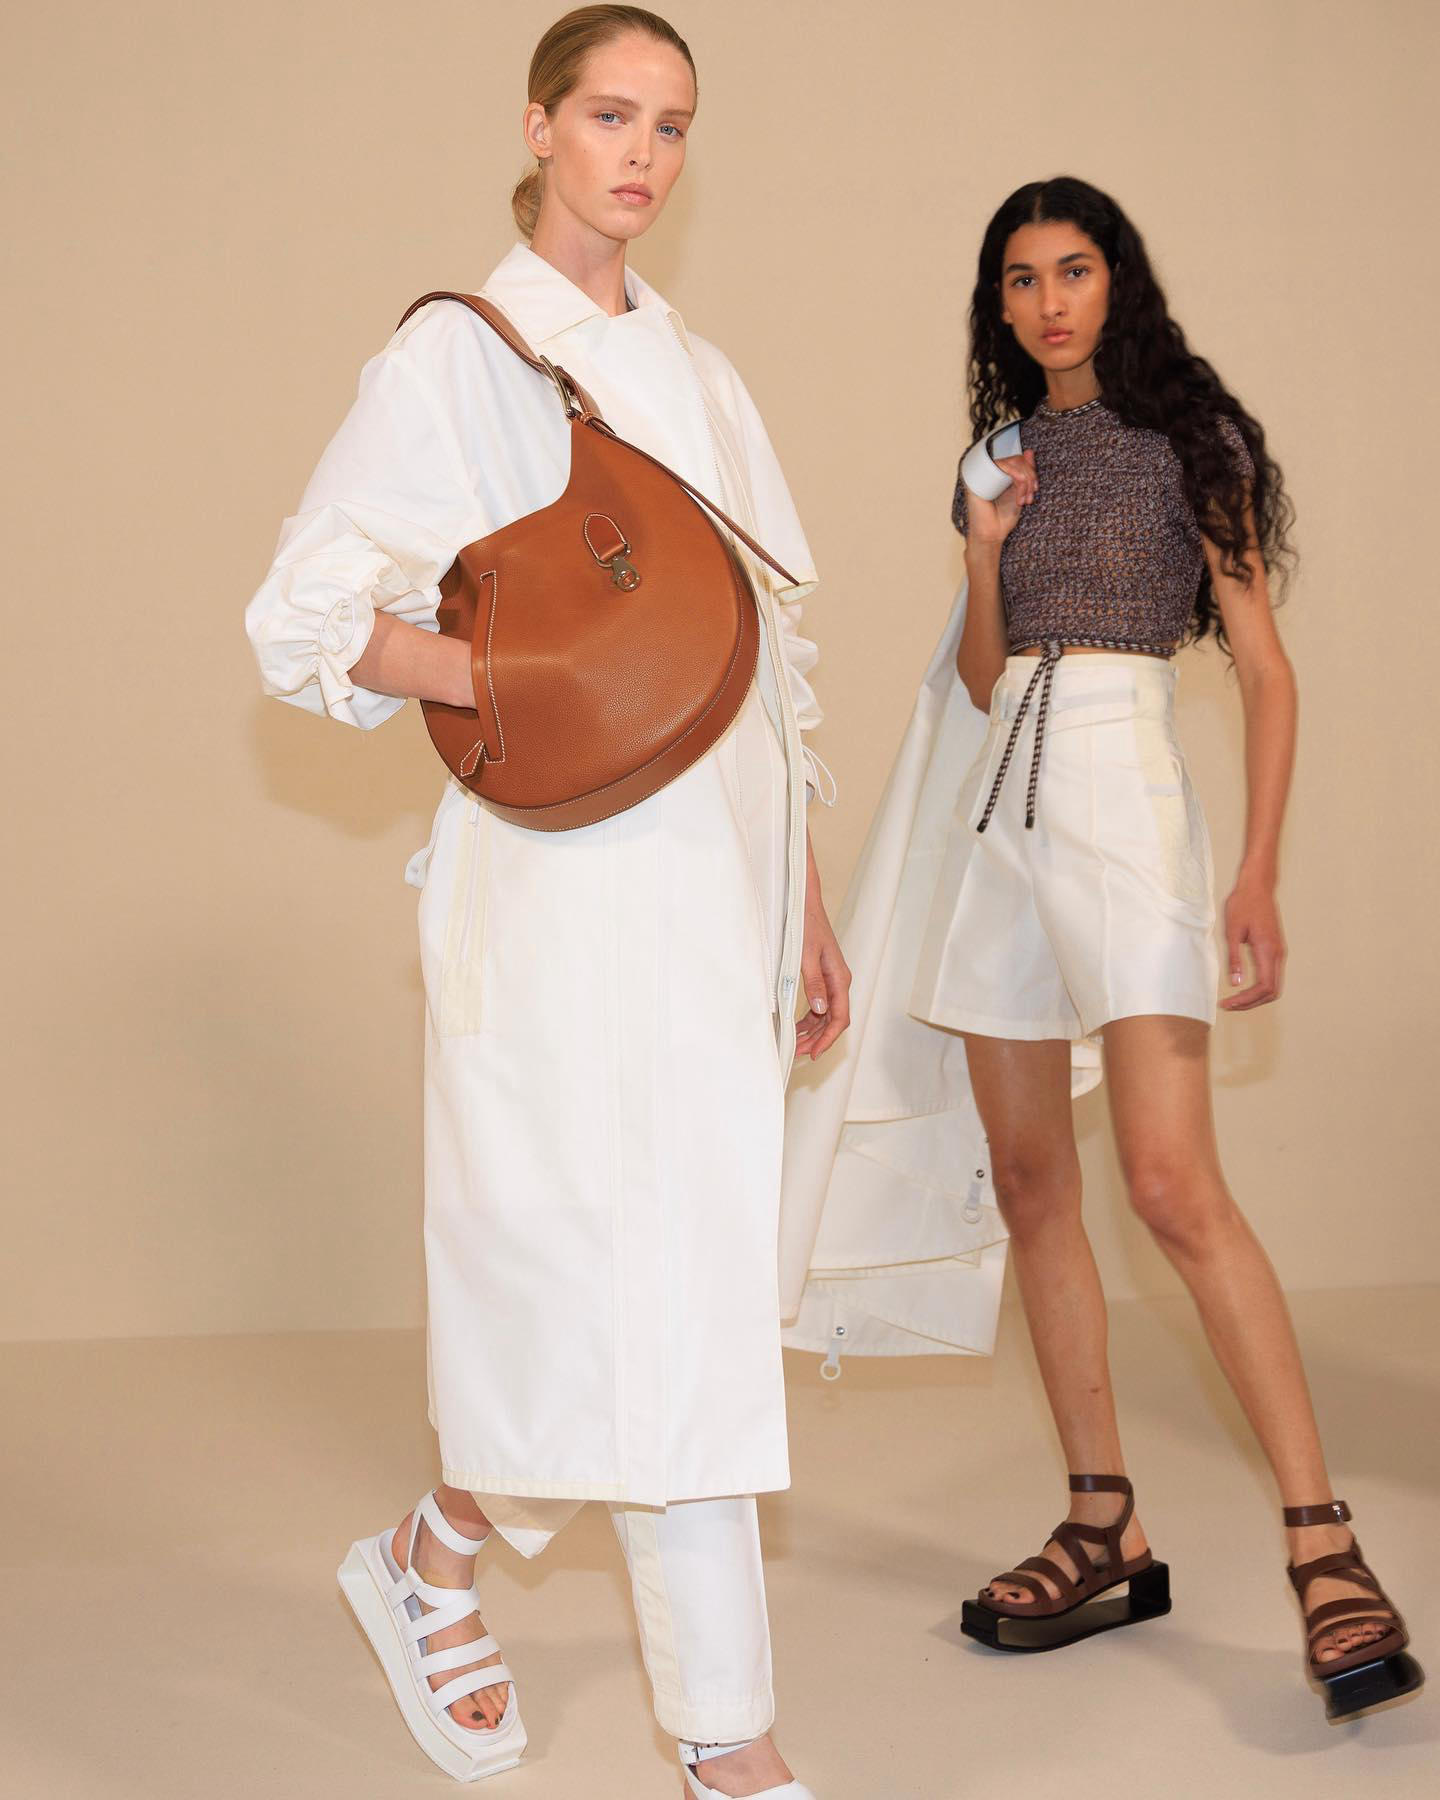 Vogue - Today at the Tennis Club de Paris, #hermes spring 2023 brought warm neutrals and abstract ge